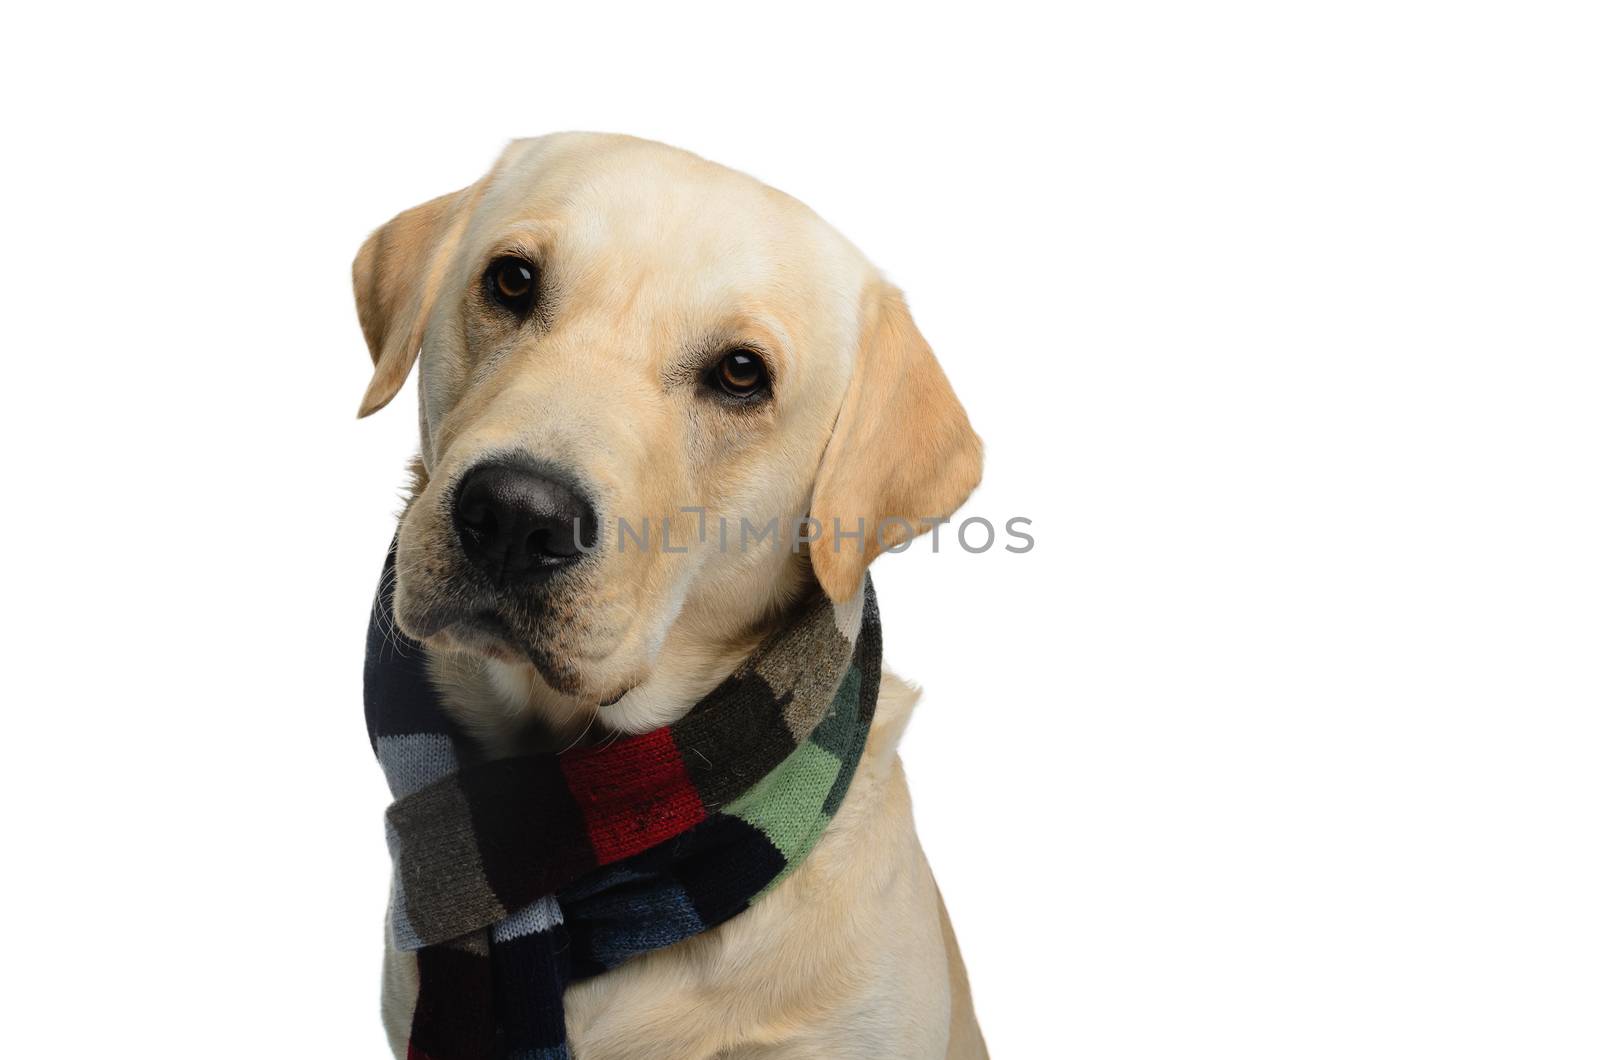 dog with scarf, costume, studio photoshoot in front of white background